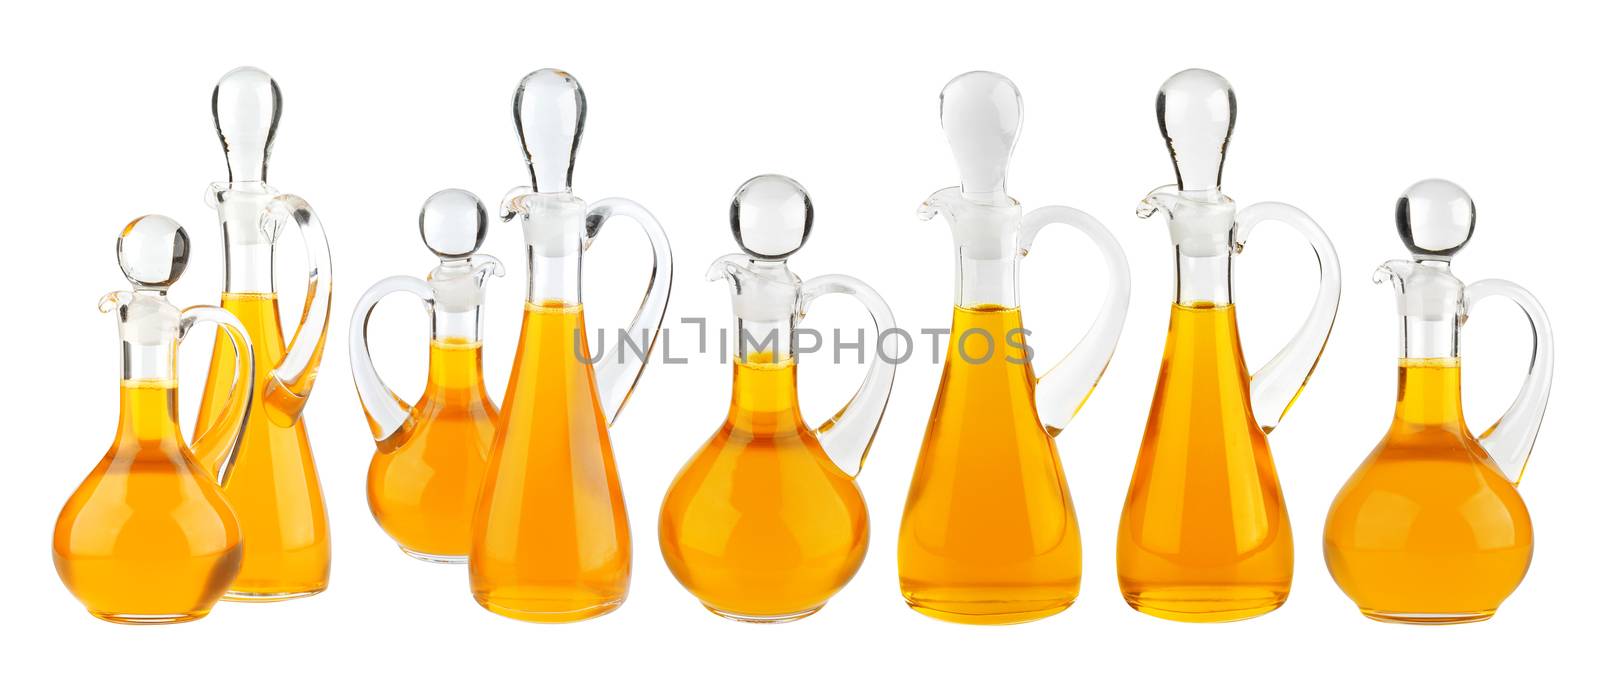 Vegelable oil isolated on white background with clipping path. Collection